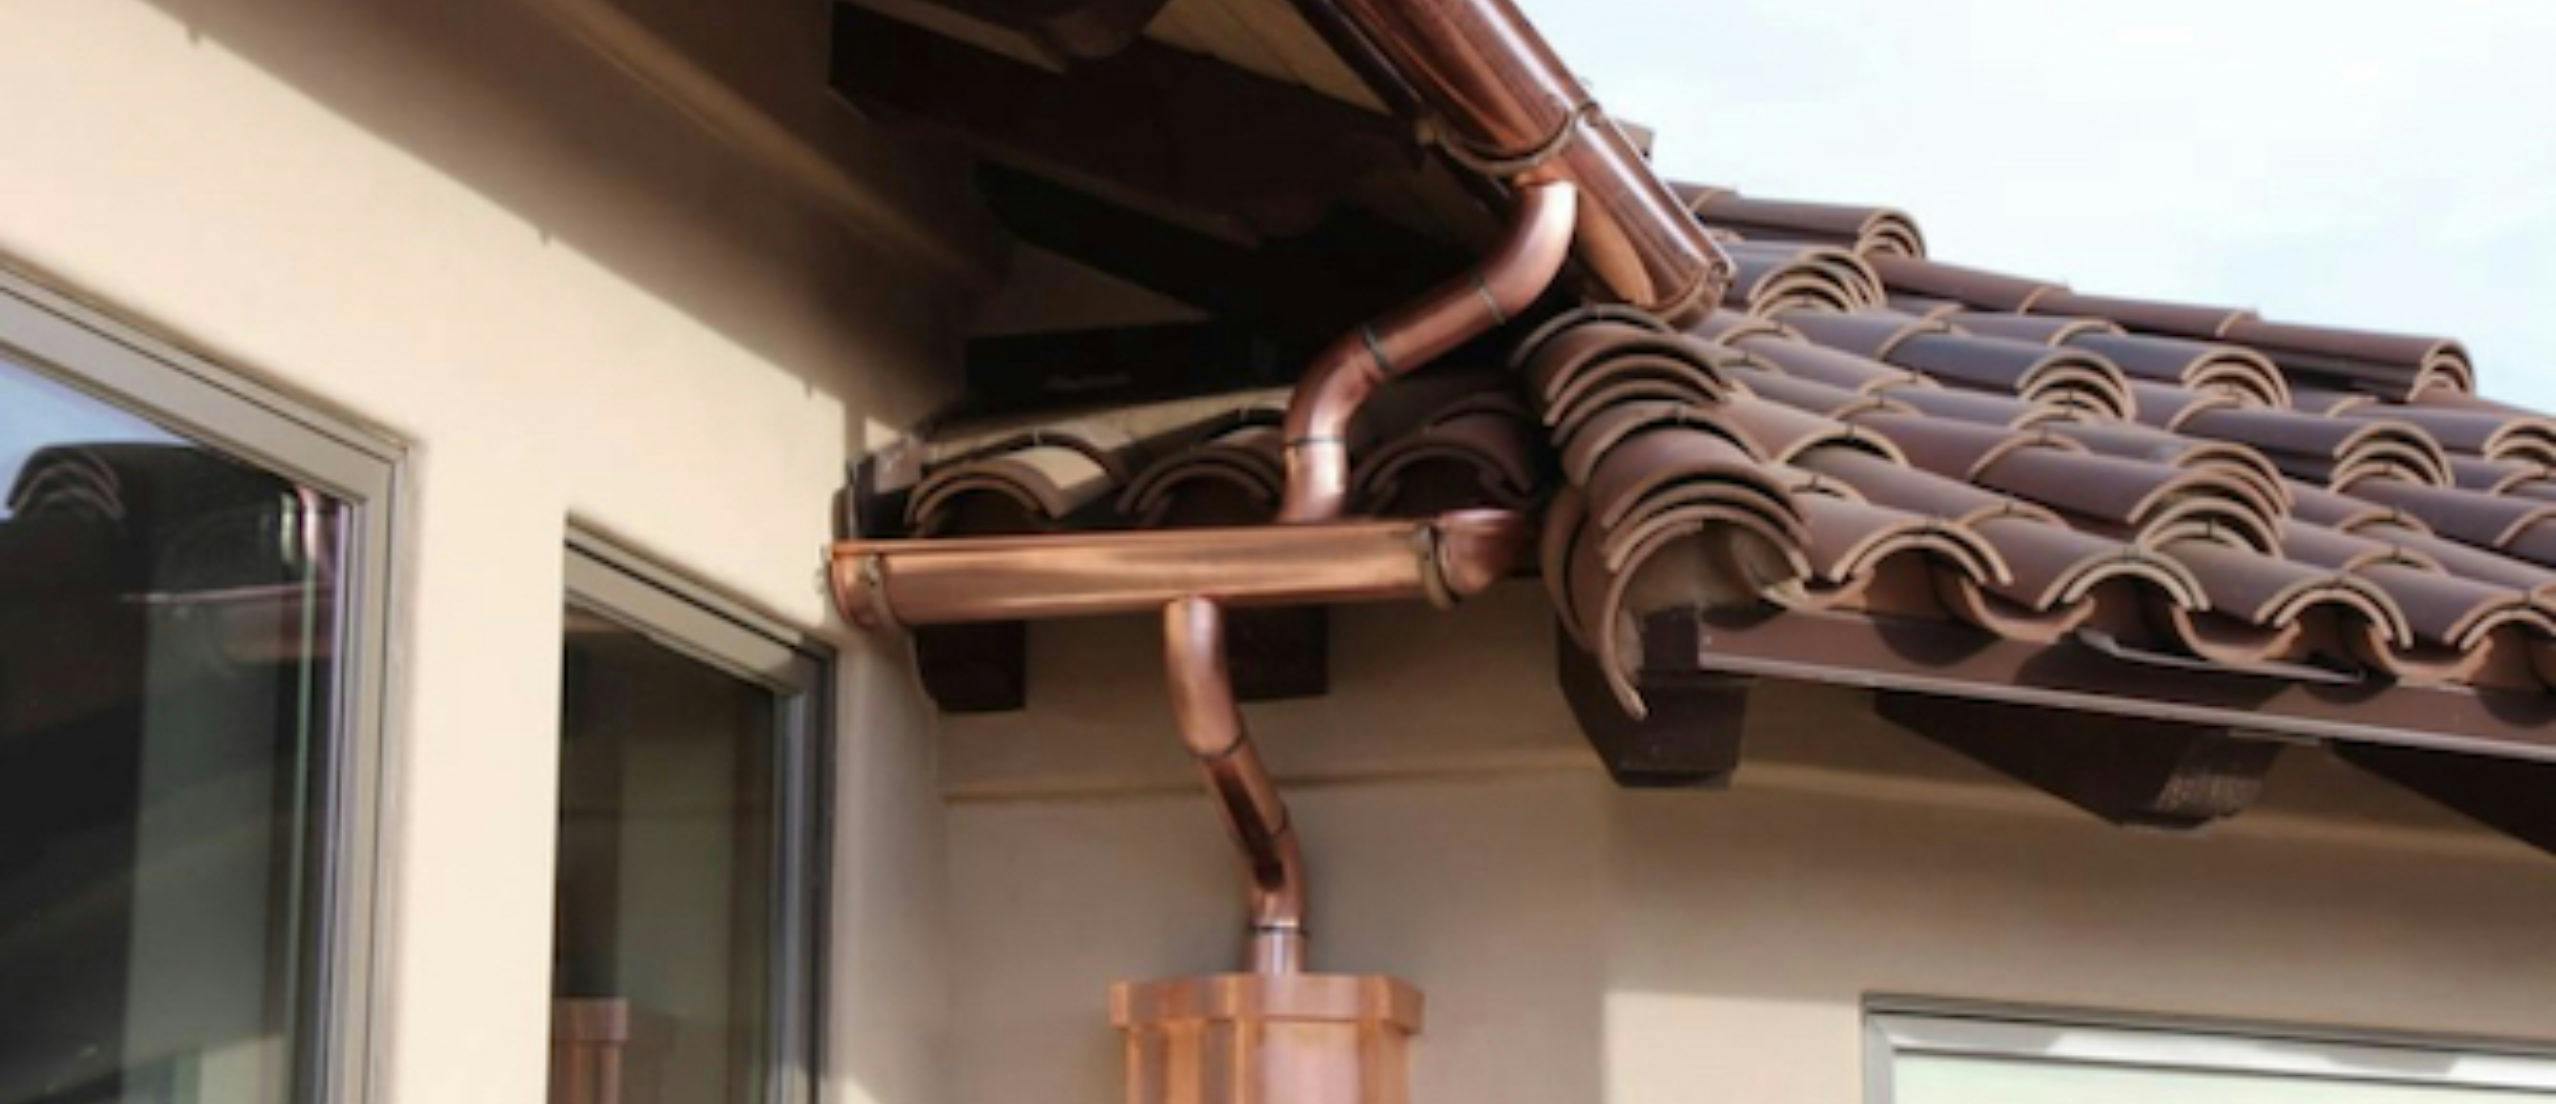 Copper gutter and downspout